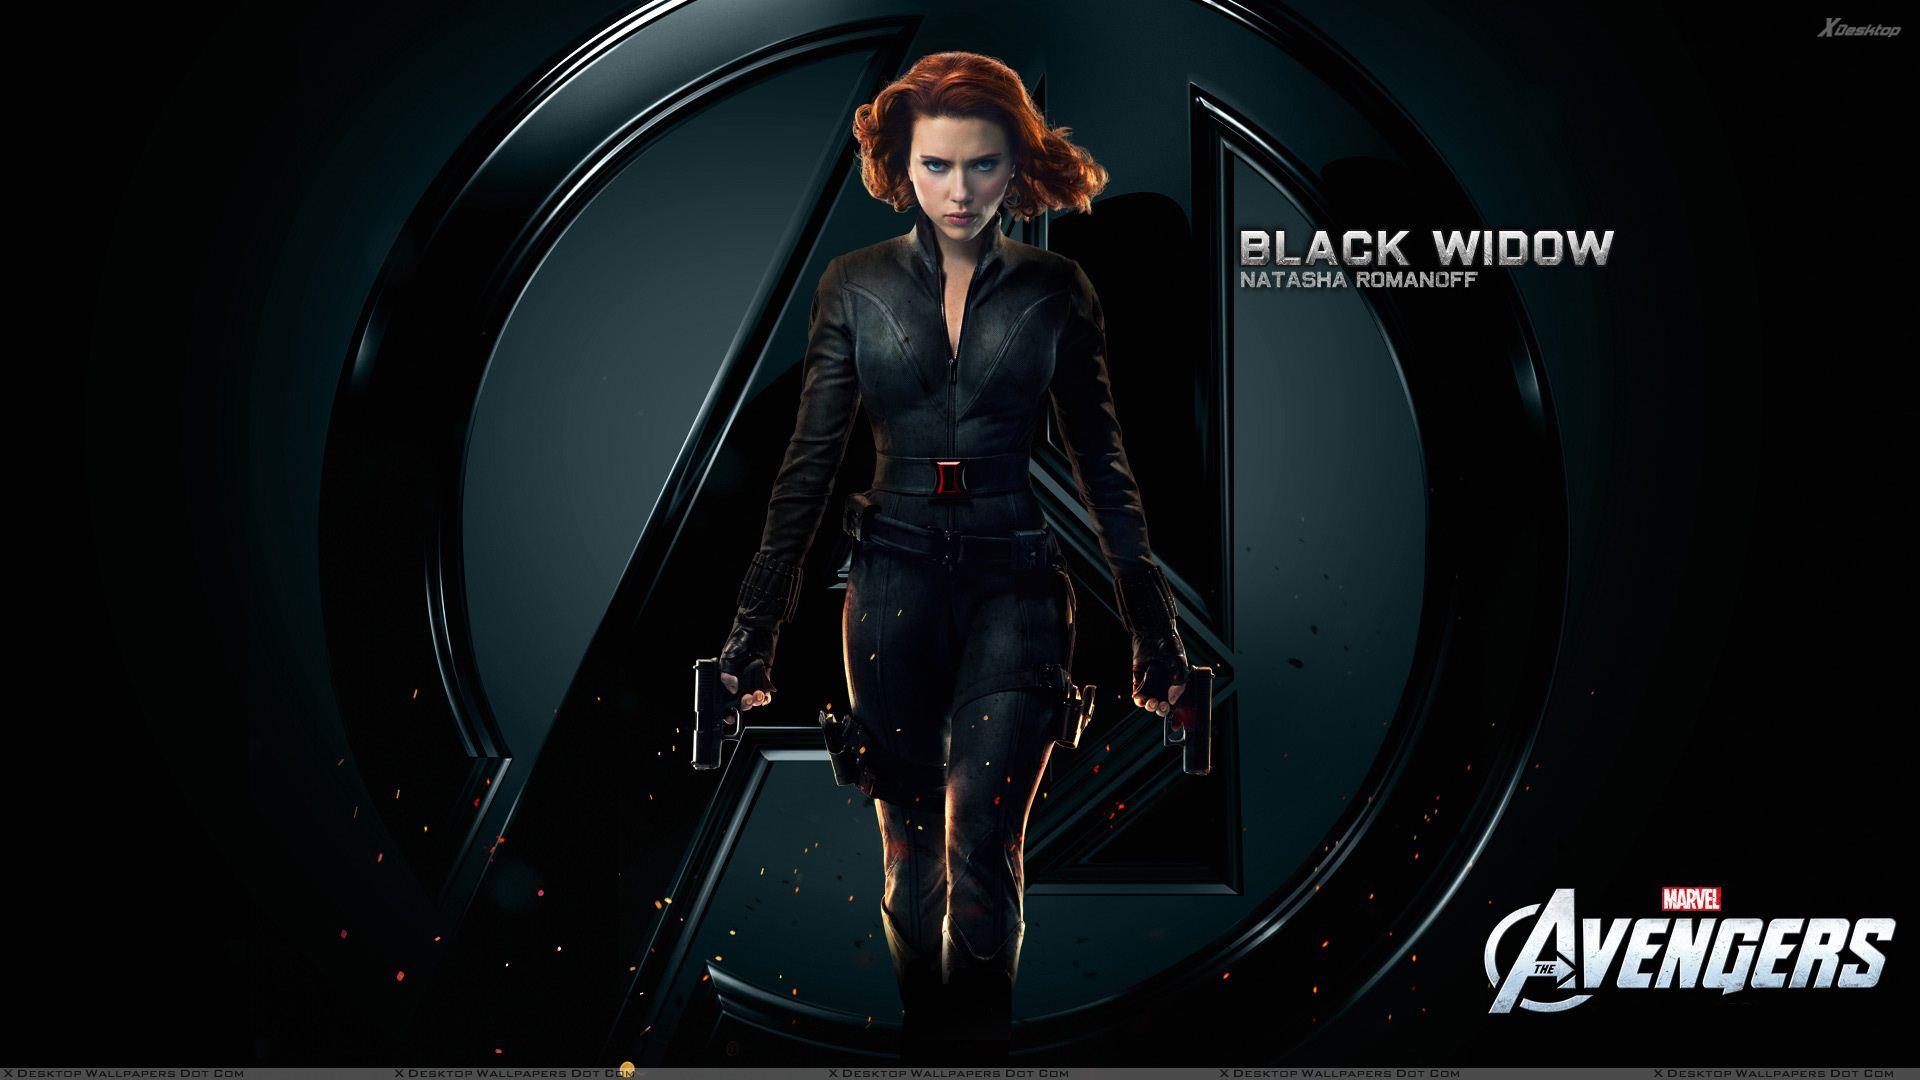 Fan Uses Iconic Comic Cover to Create Awesome Black Widow Movie Poster